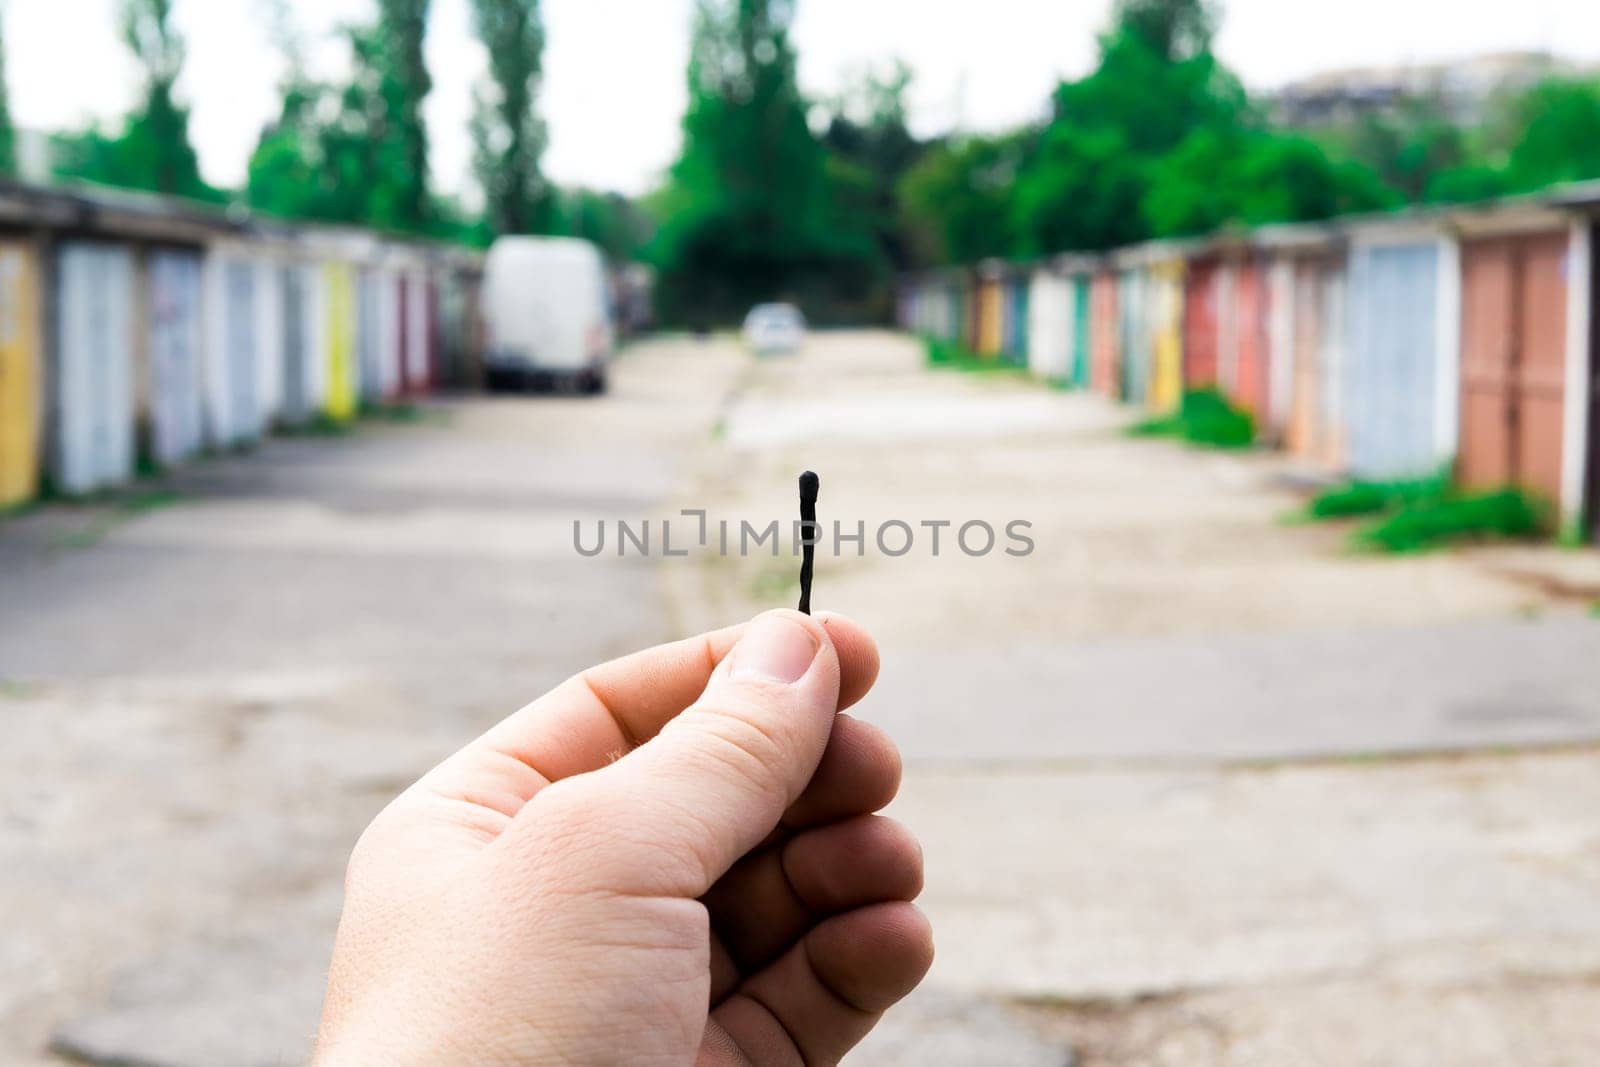 A match, a hand with matches against the background of old garages in city.